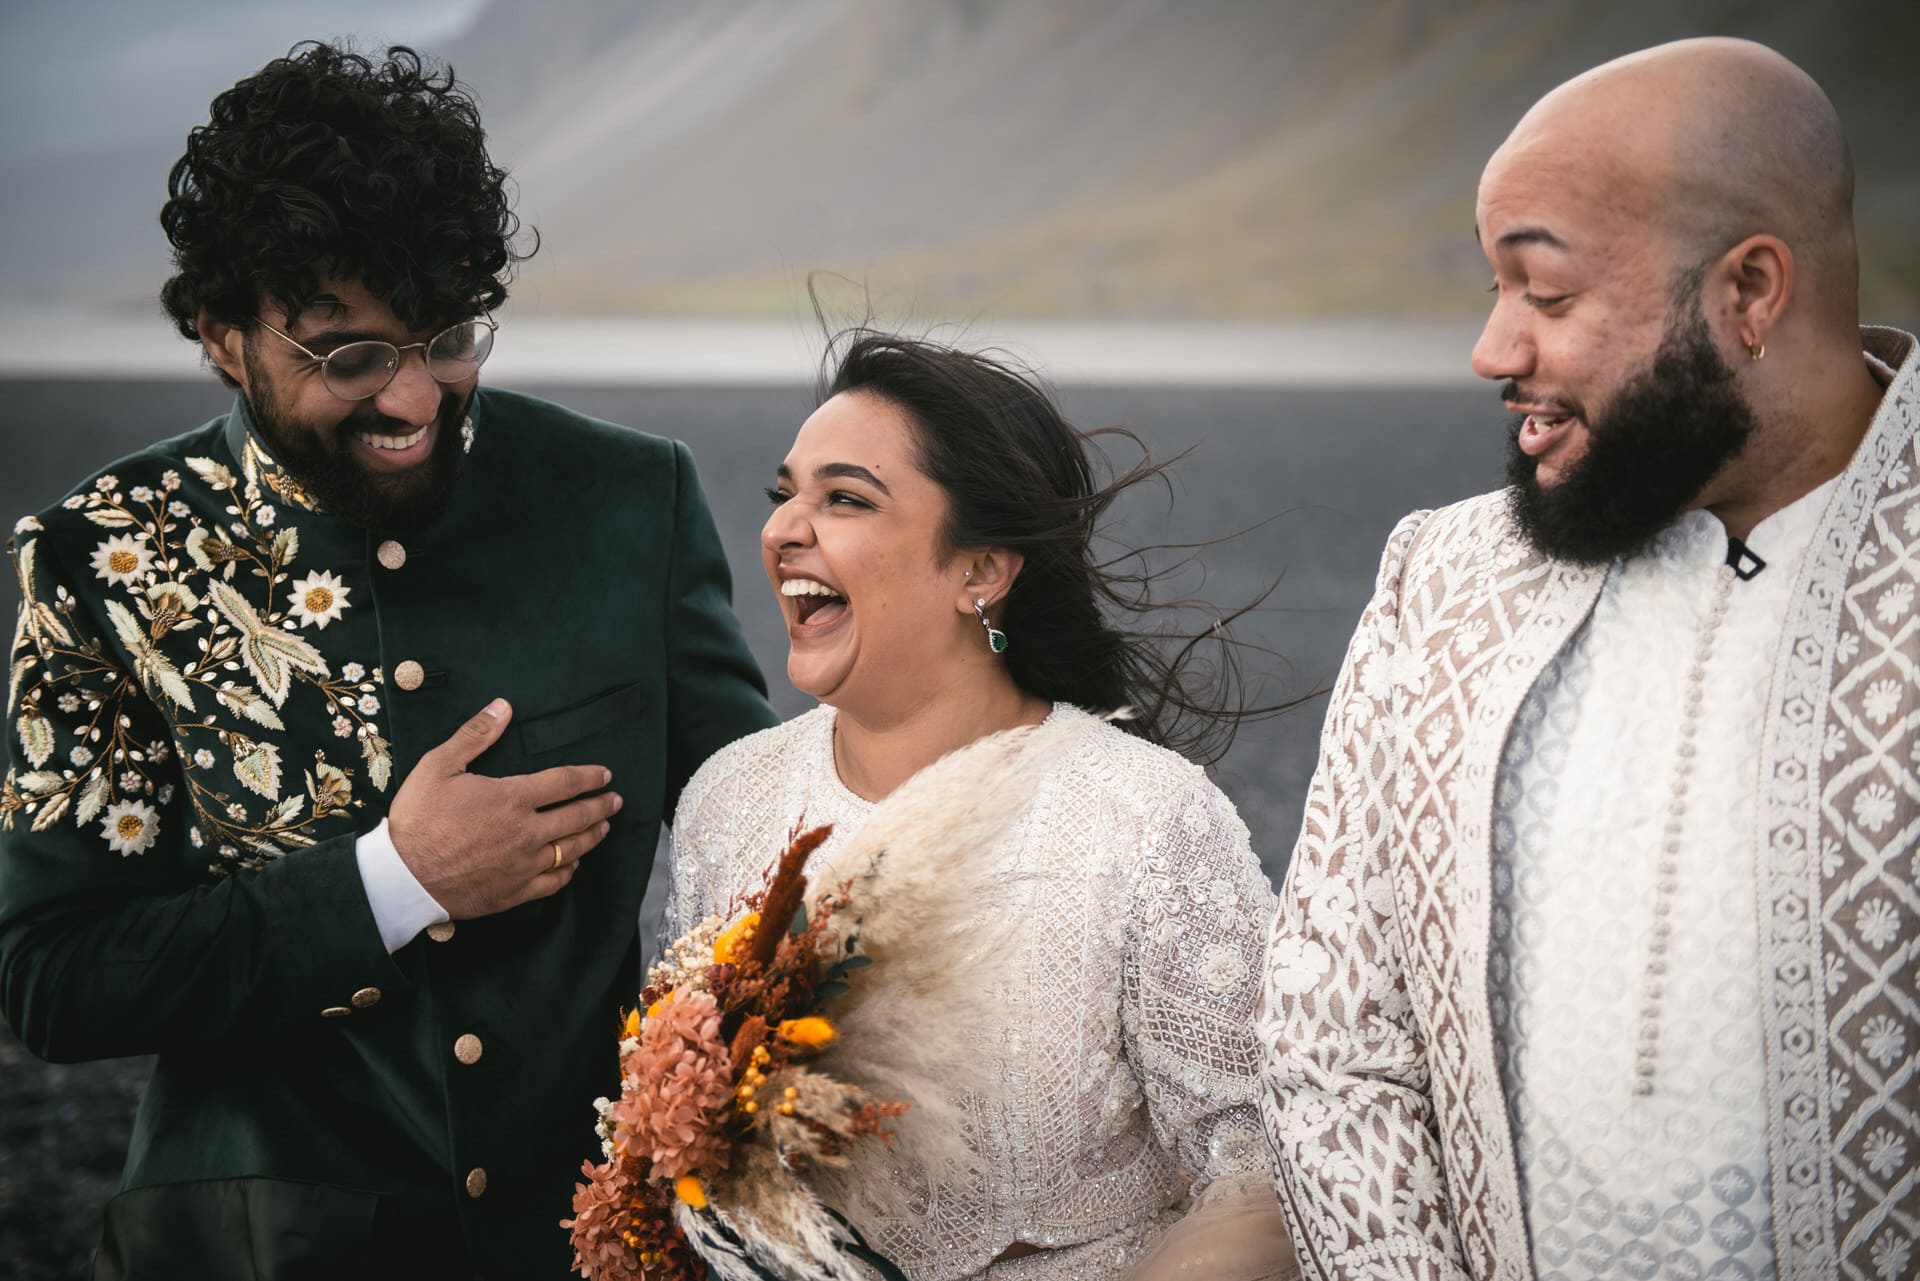 Joyful moments at their East Iceland ceremony.